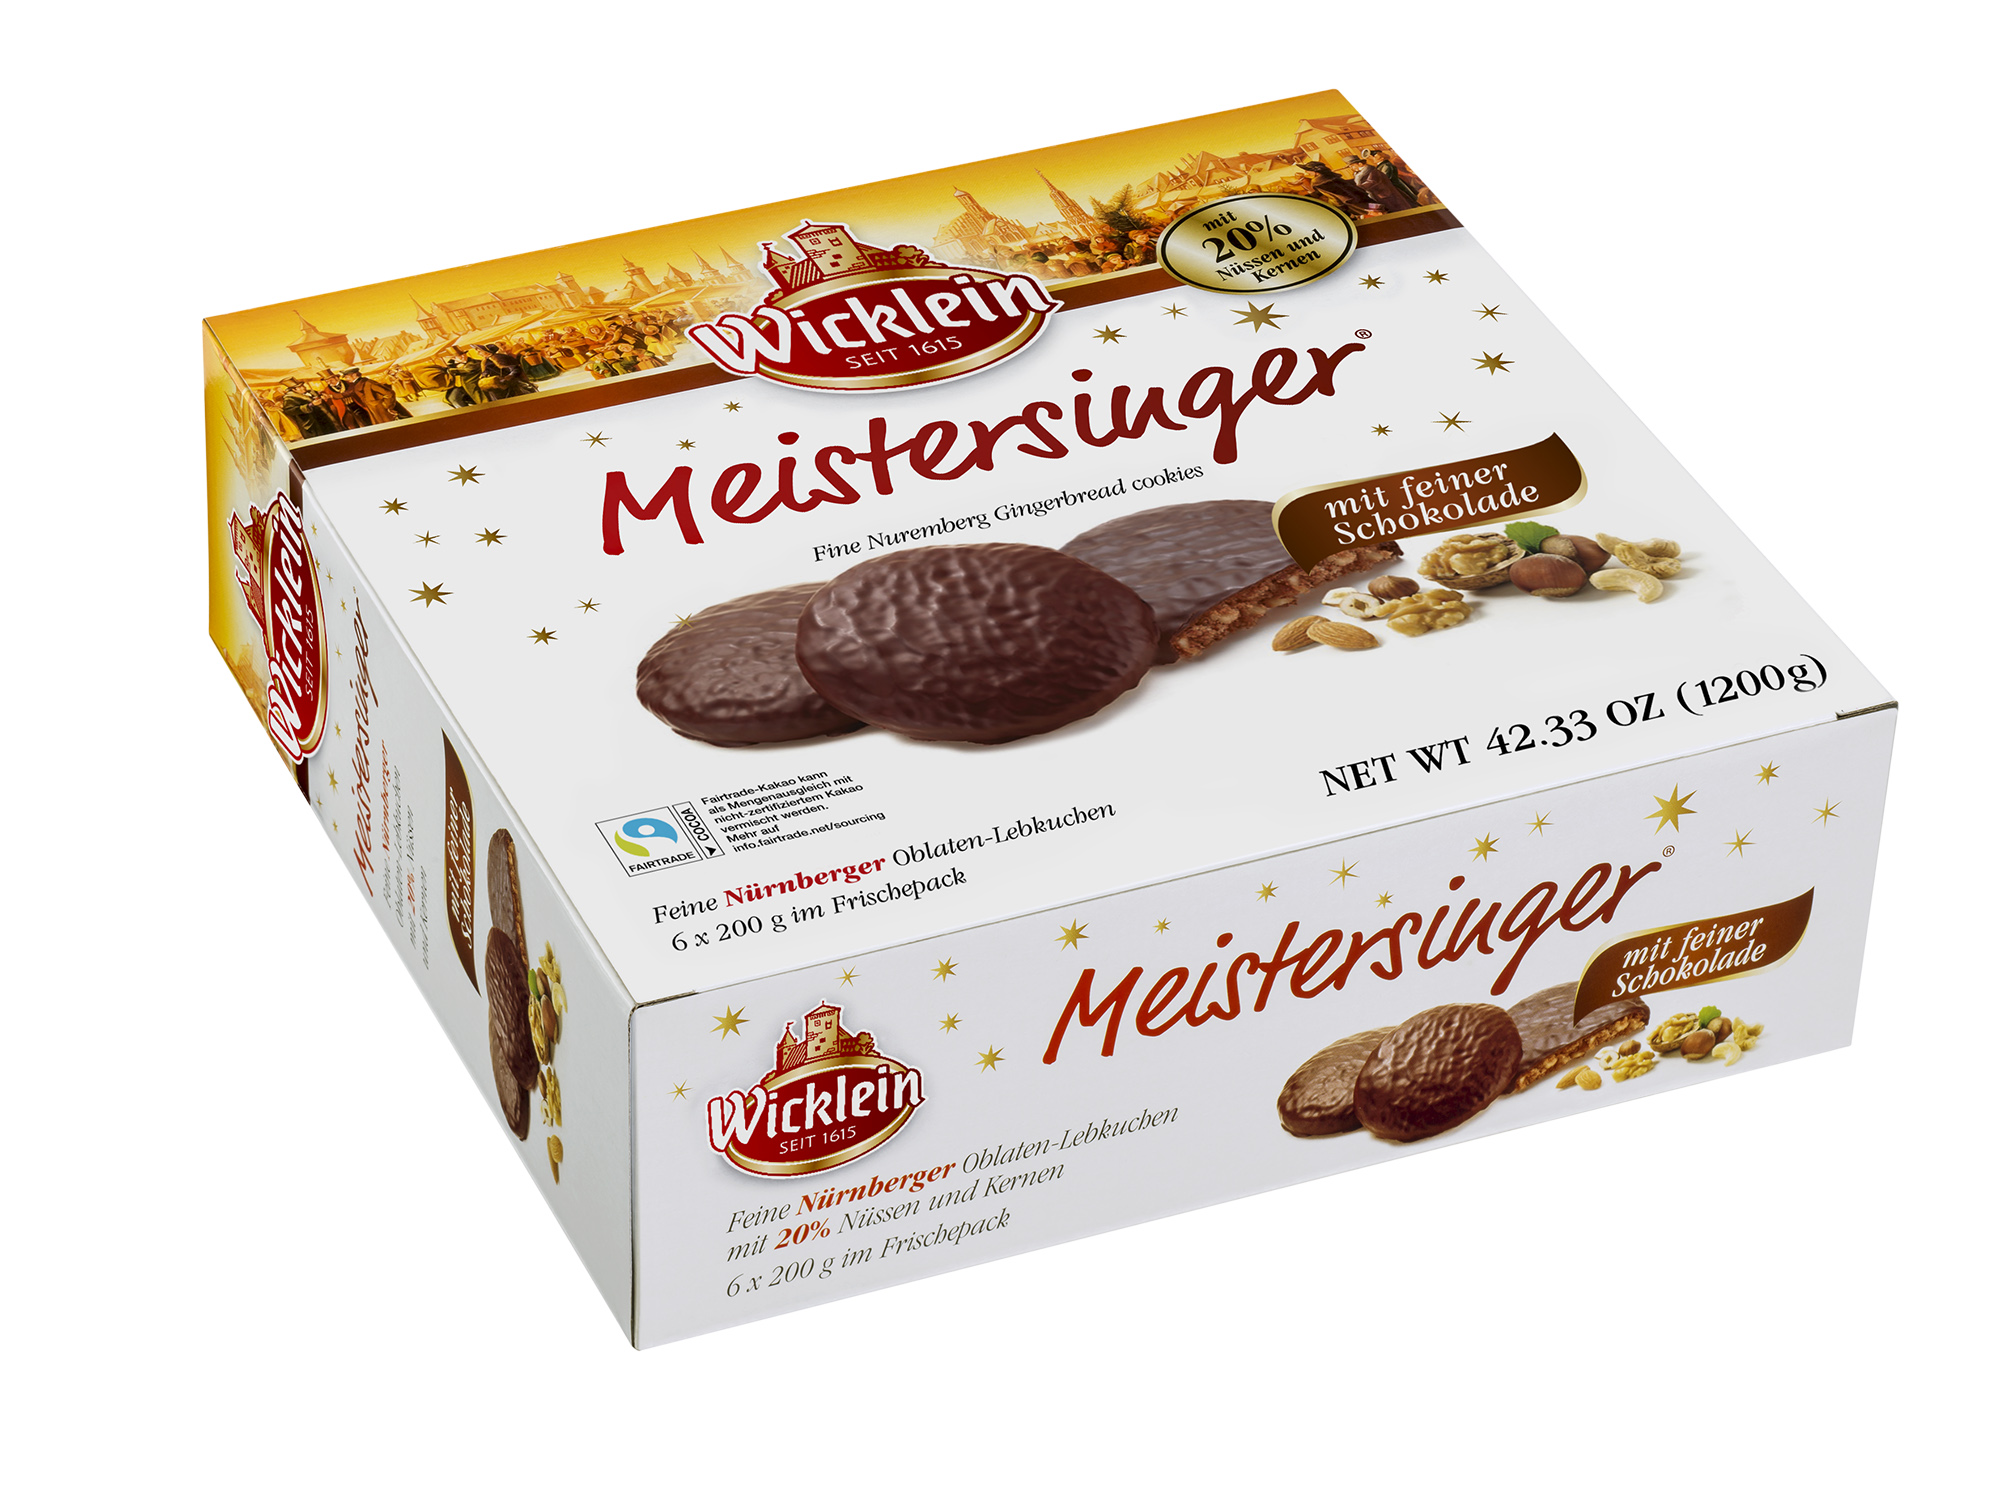 Fine Nuremberg Gingerbread (Oblaten-Lebkuchen) cookies with 20 % nuts and kernels